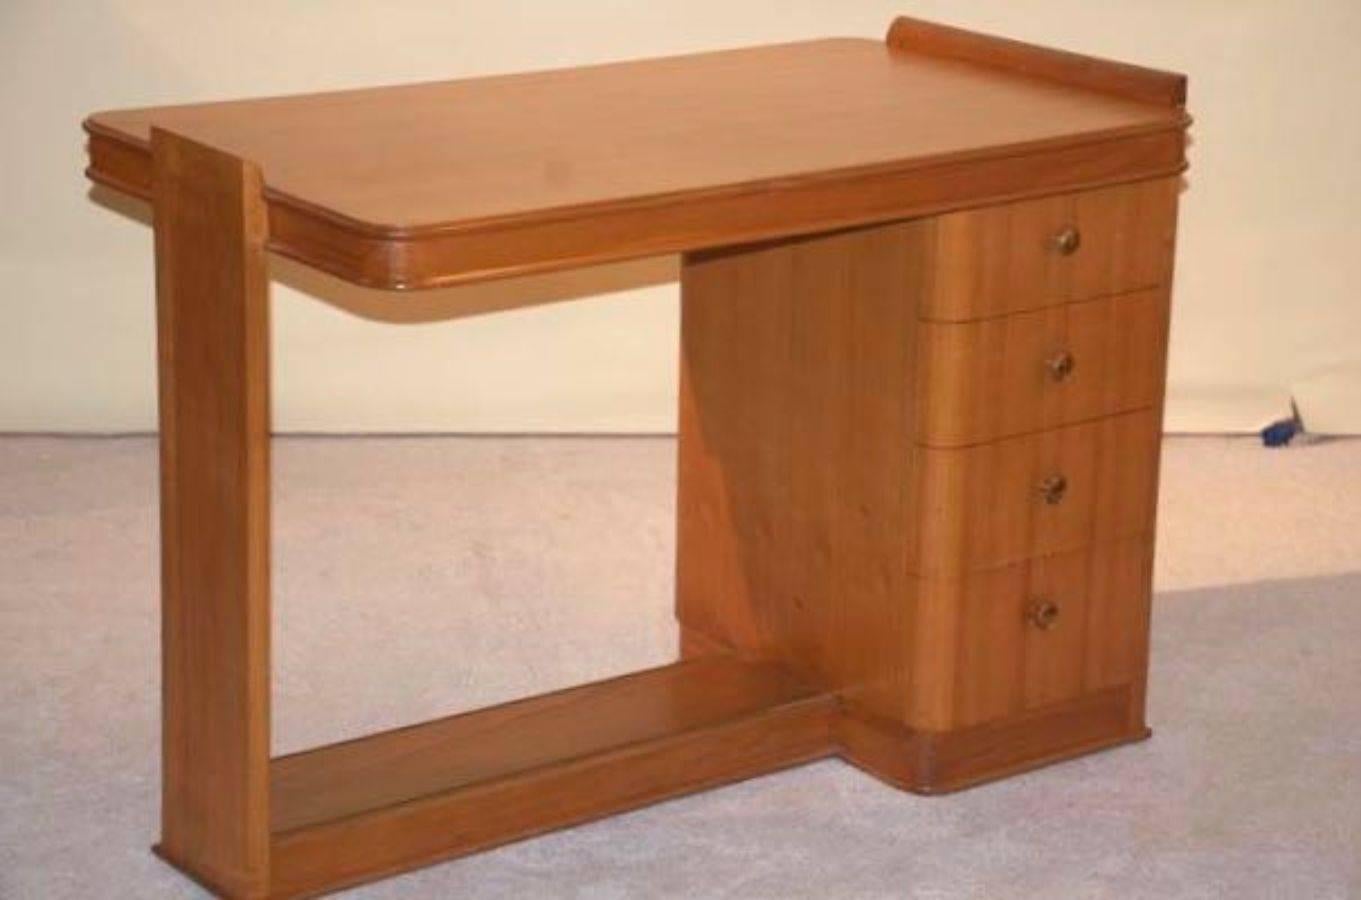 French Art Deco desk, circa 1935 by Dominique in Ceylonese lemonwood with bronze fittings. The guest side has a pull-out tablet area suitable for a laptop or tablet.